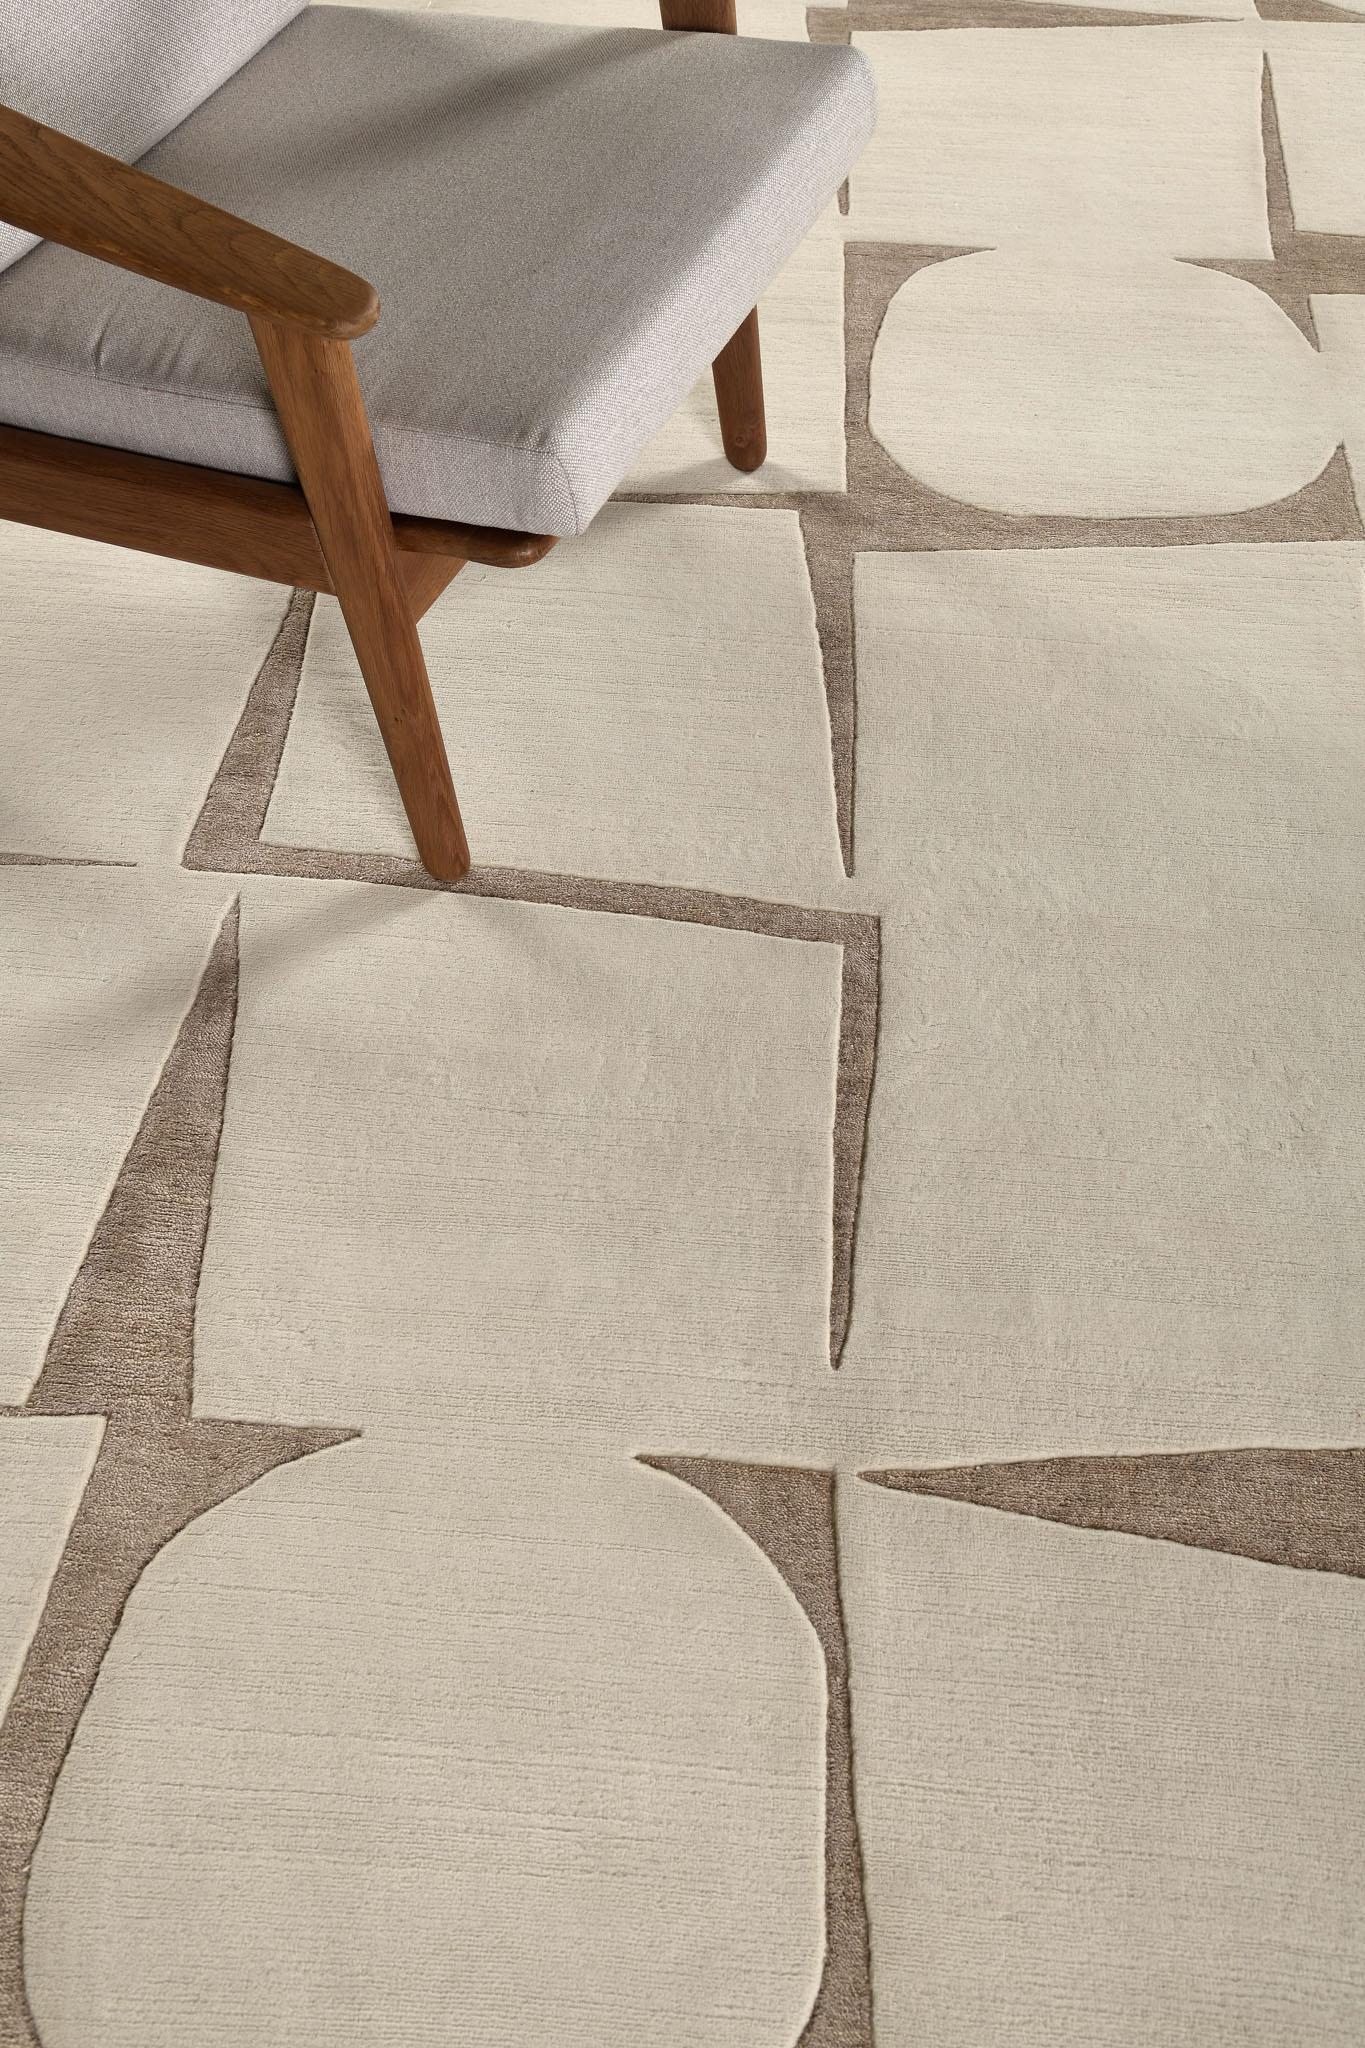 Toccato’ features stacked geometrical patterns depicting aesthetic artistry. It is a part of the Design Rhymes Collection which pulls inspiration from different aspects of architecture. This rug is rendered in the most soothing shade of beige and